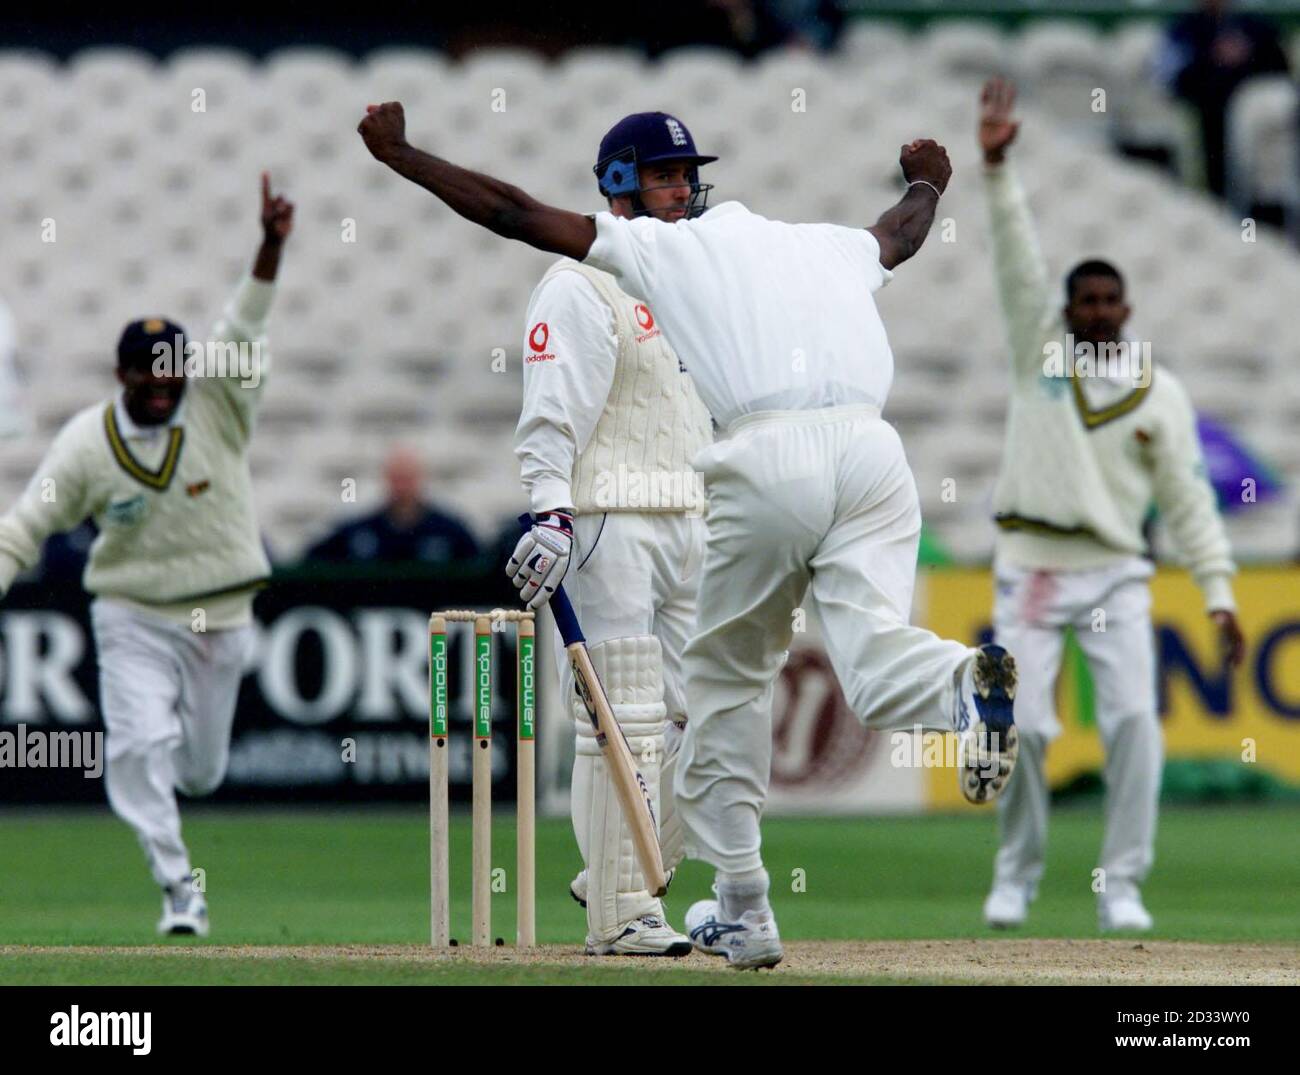 England's Graham Thorpe looks hard at the umpire as a head down Sri Lankan bowler Eric Upashantha celebrates gaining Thorpe's wicket, caught by Sangakkara, during 3rd nPower Test at Old Trafford, Manchester. Stock Photo